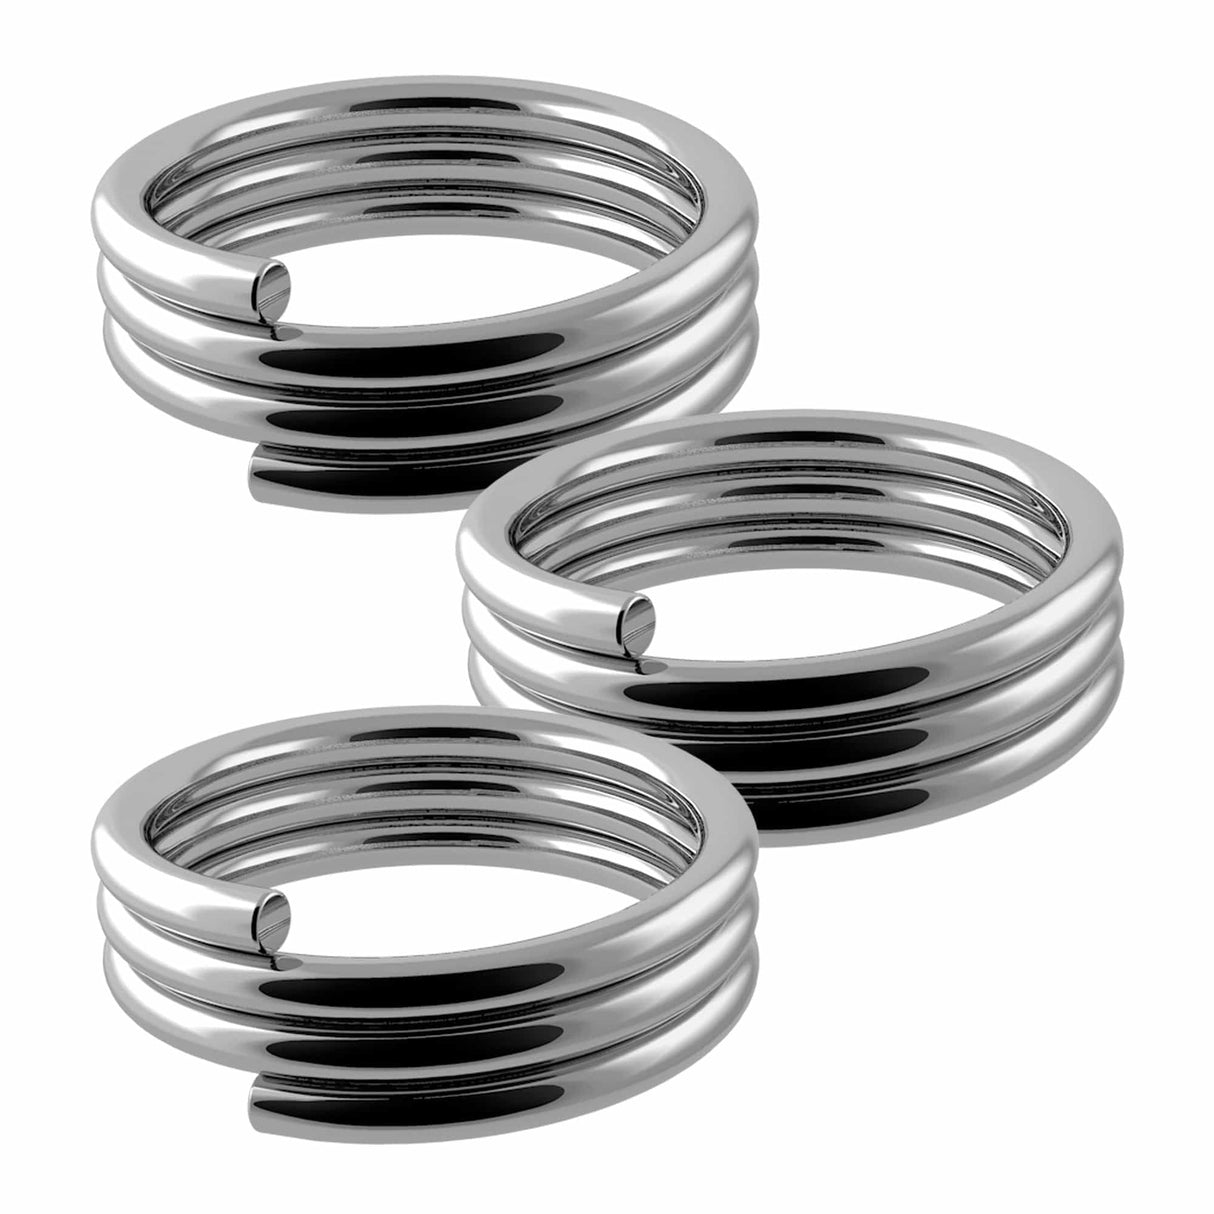 Designa Springs - for use with Nylon Shafts - 1 Set (3) Silver